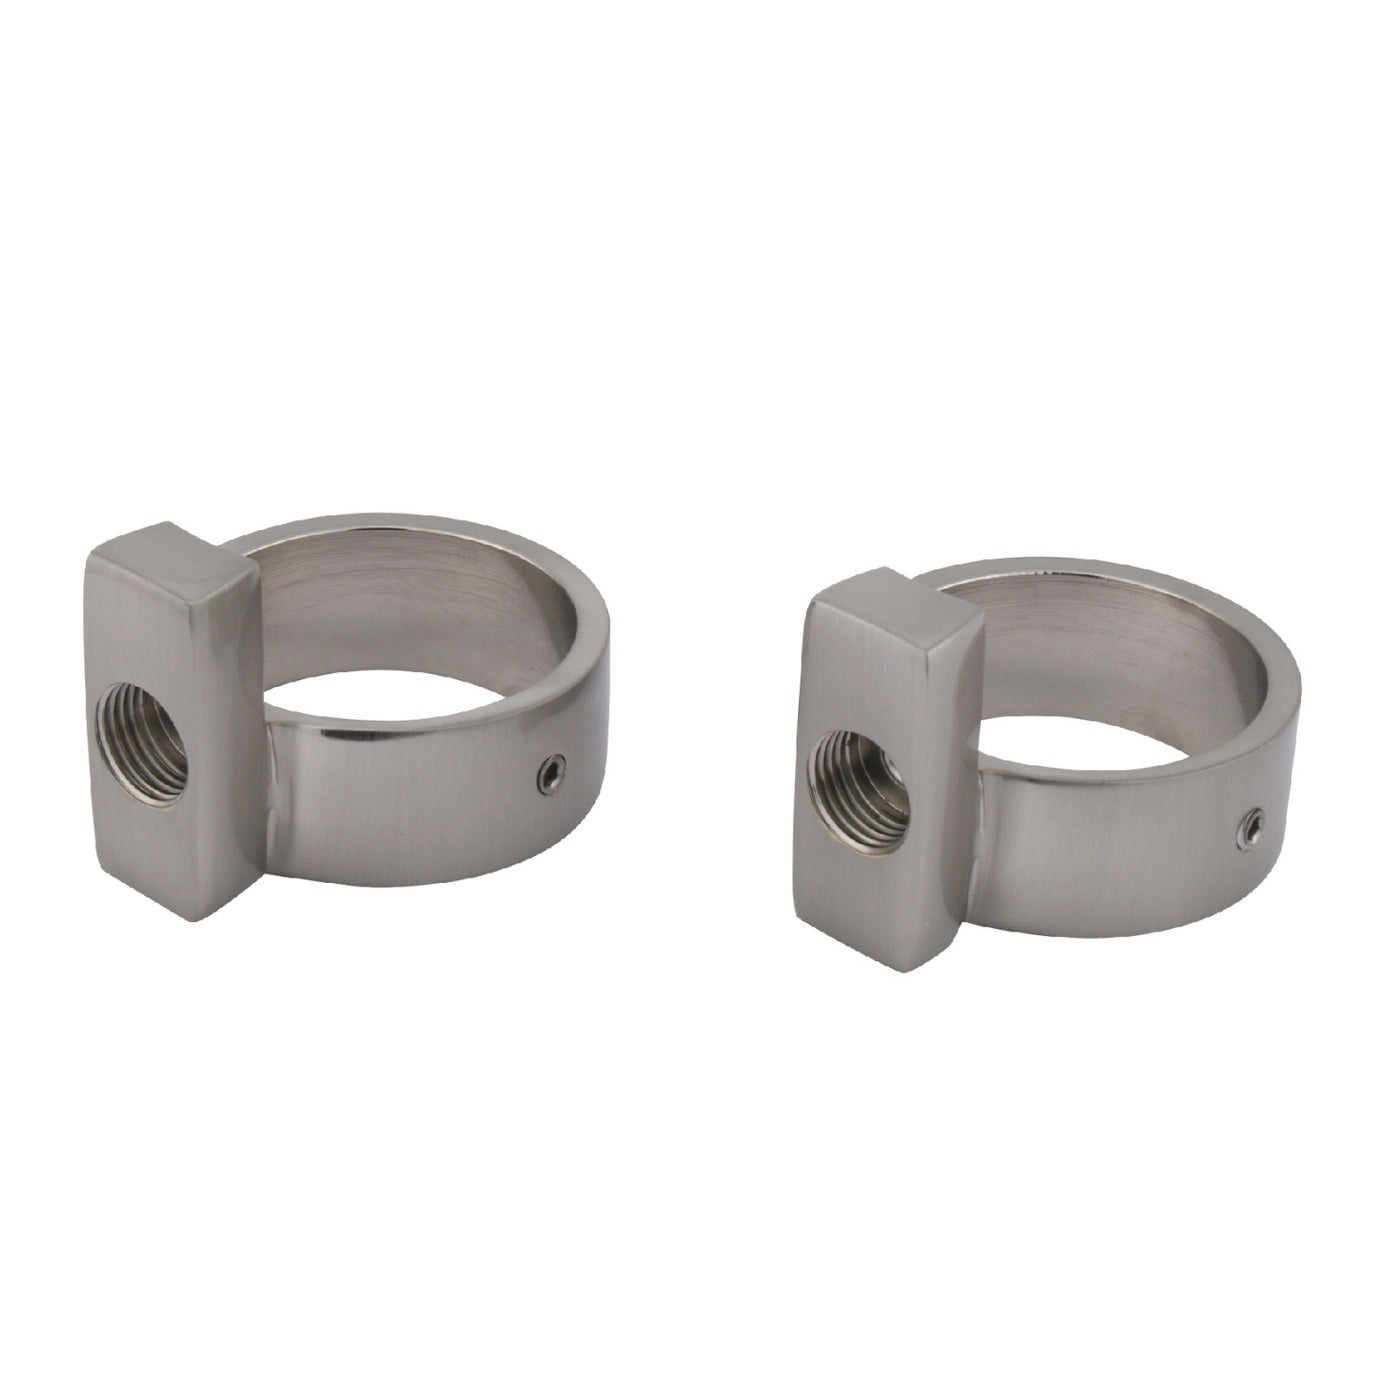 Elements of Design DS438 Drain Bracelets for Supply Line Support from CC458, Brushed Nickel